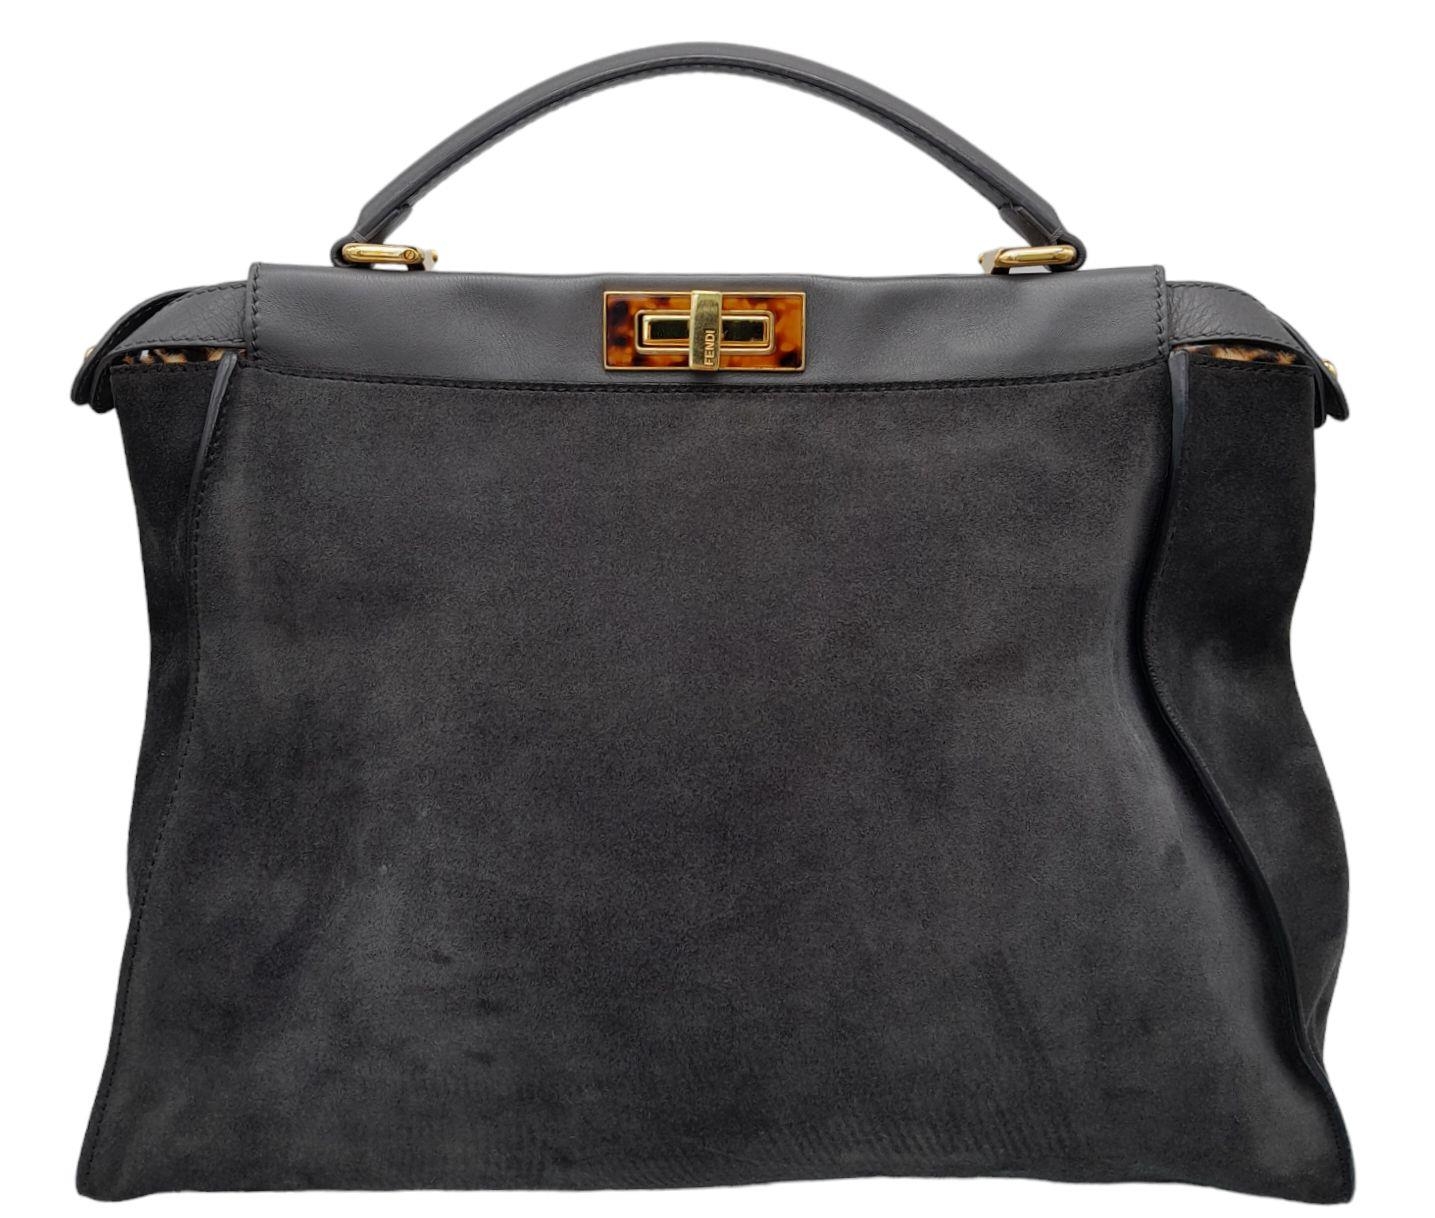 A Fendi Grey Peekaboo Bag. Suede exterior with leather trim, single leather handle, gold-toned - Image 2 of 9